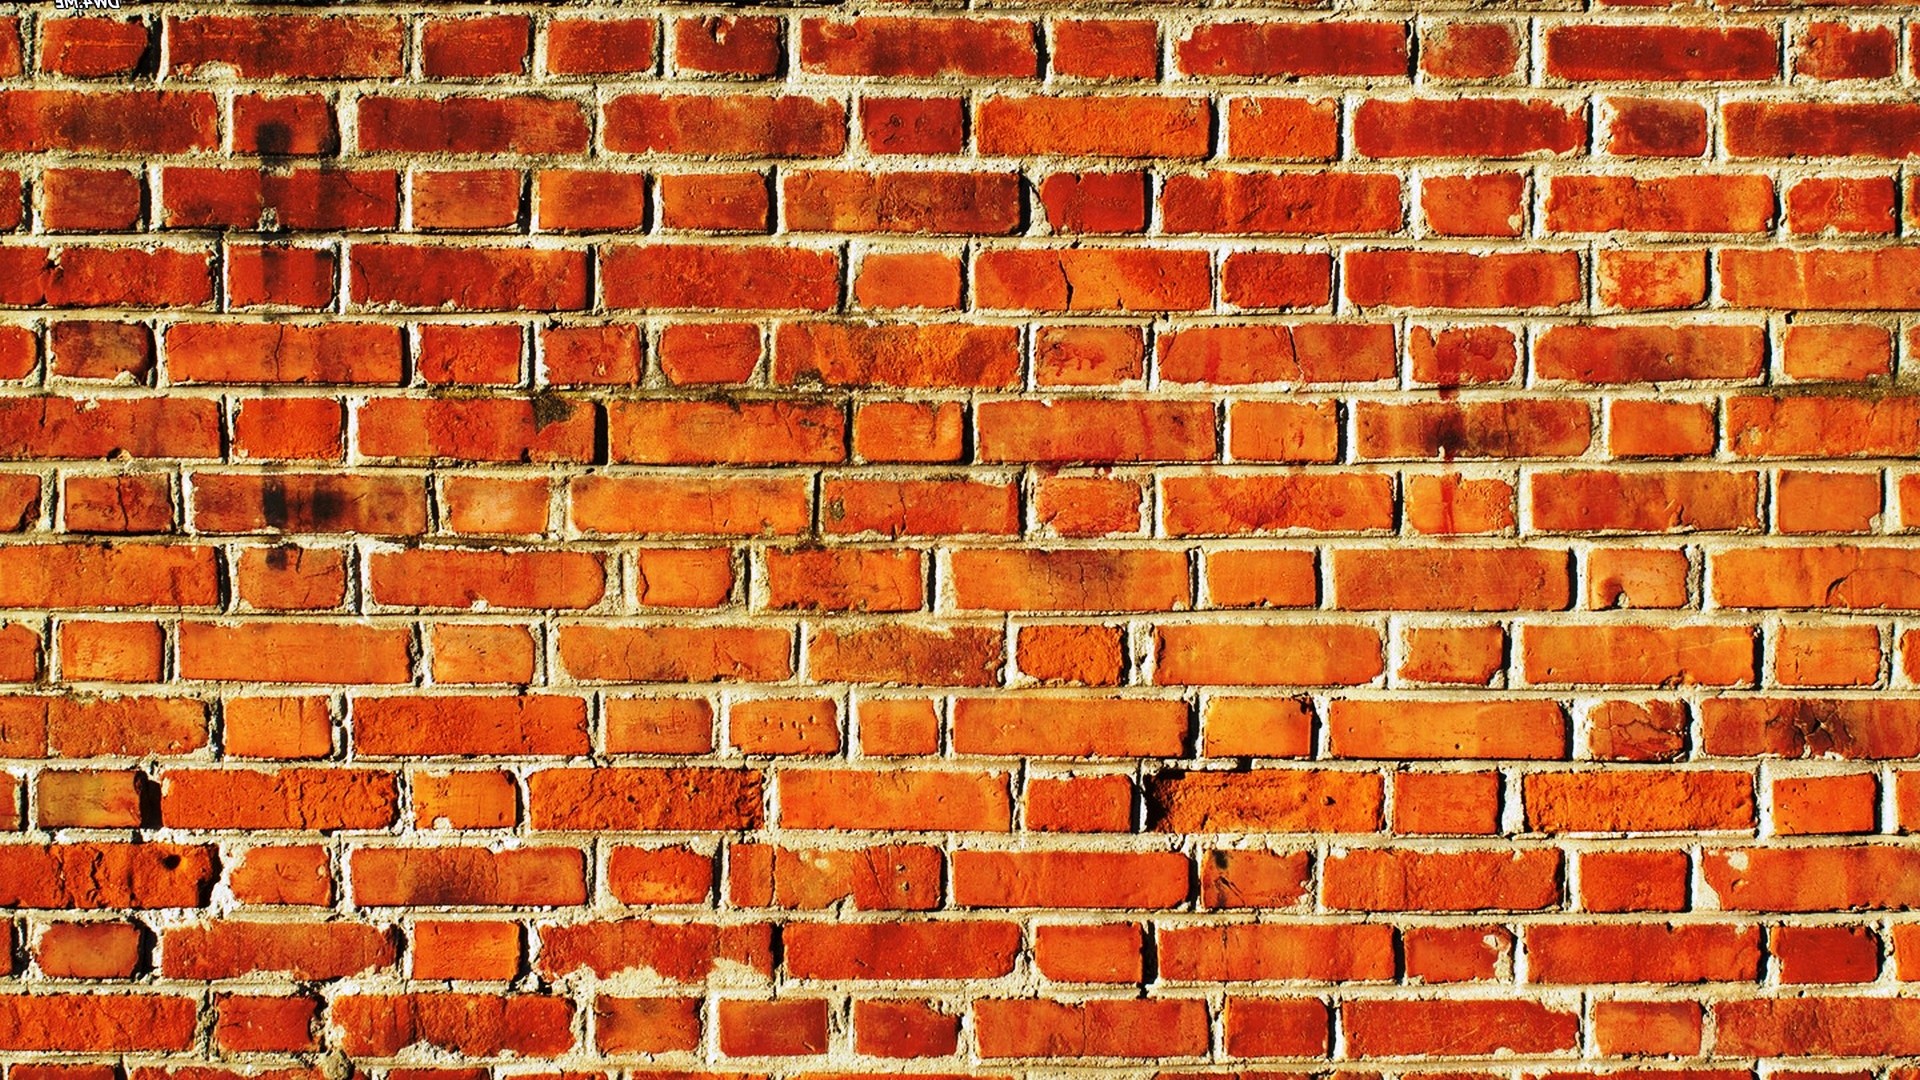 Brick Desktop Wallpaper HD With high-resolution 1920X1080 pixel. You can use and set as wallpaper for Notebook Screensavers, Mac Wallpapers, Mobile Home Screen, iPhone or Android Phones Lock Screen